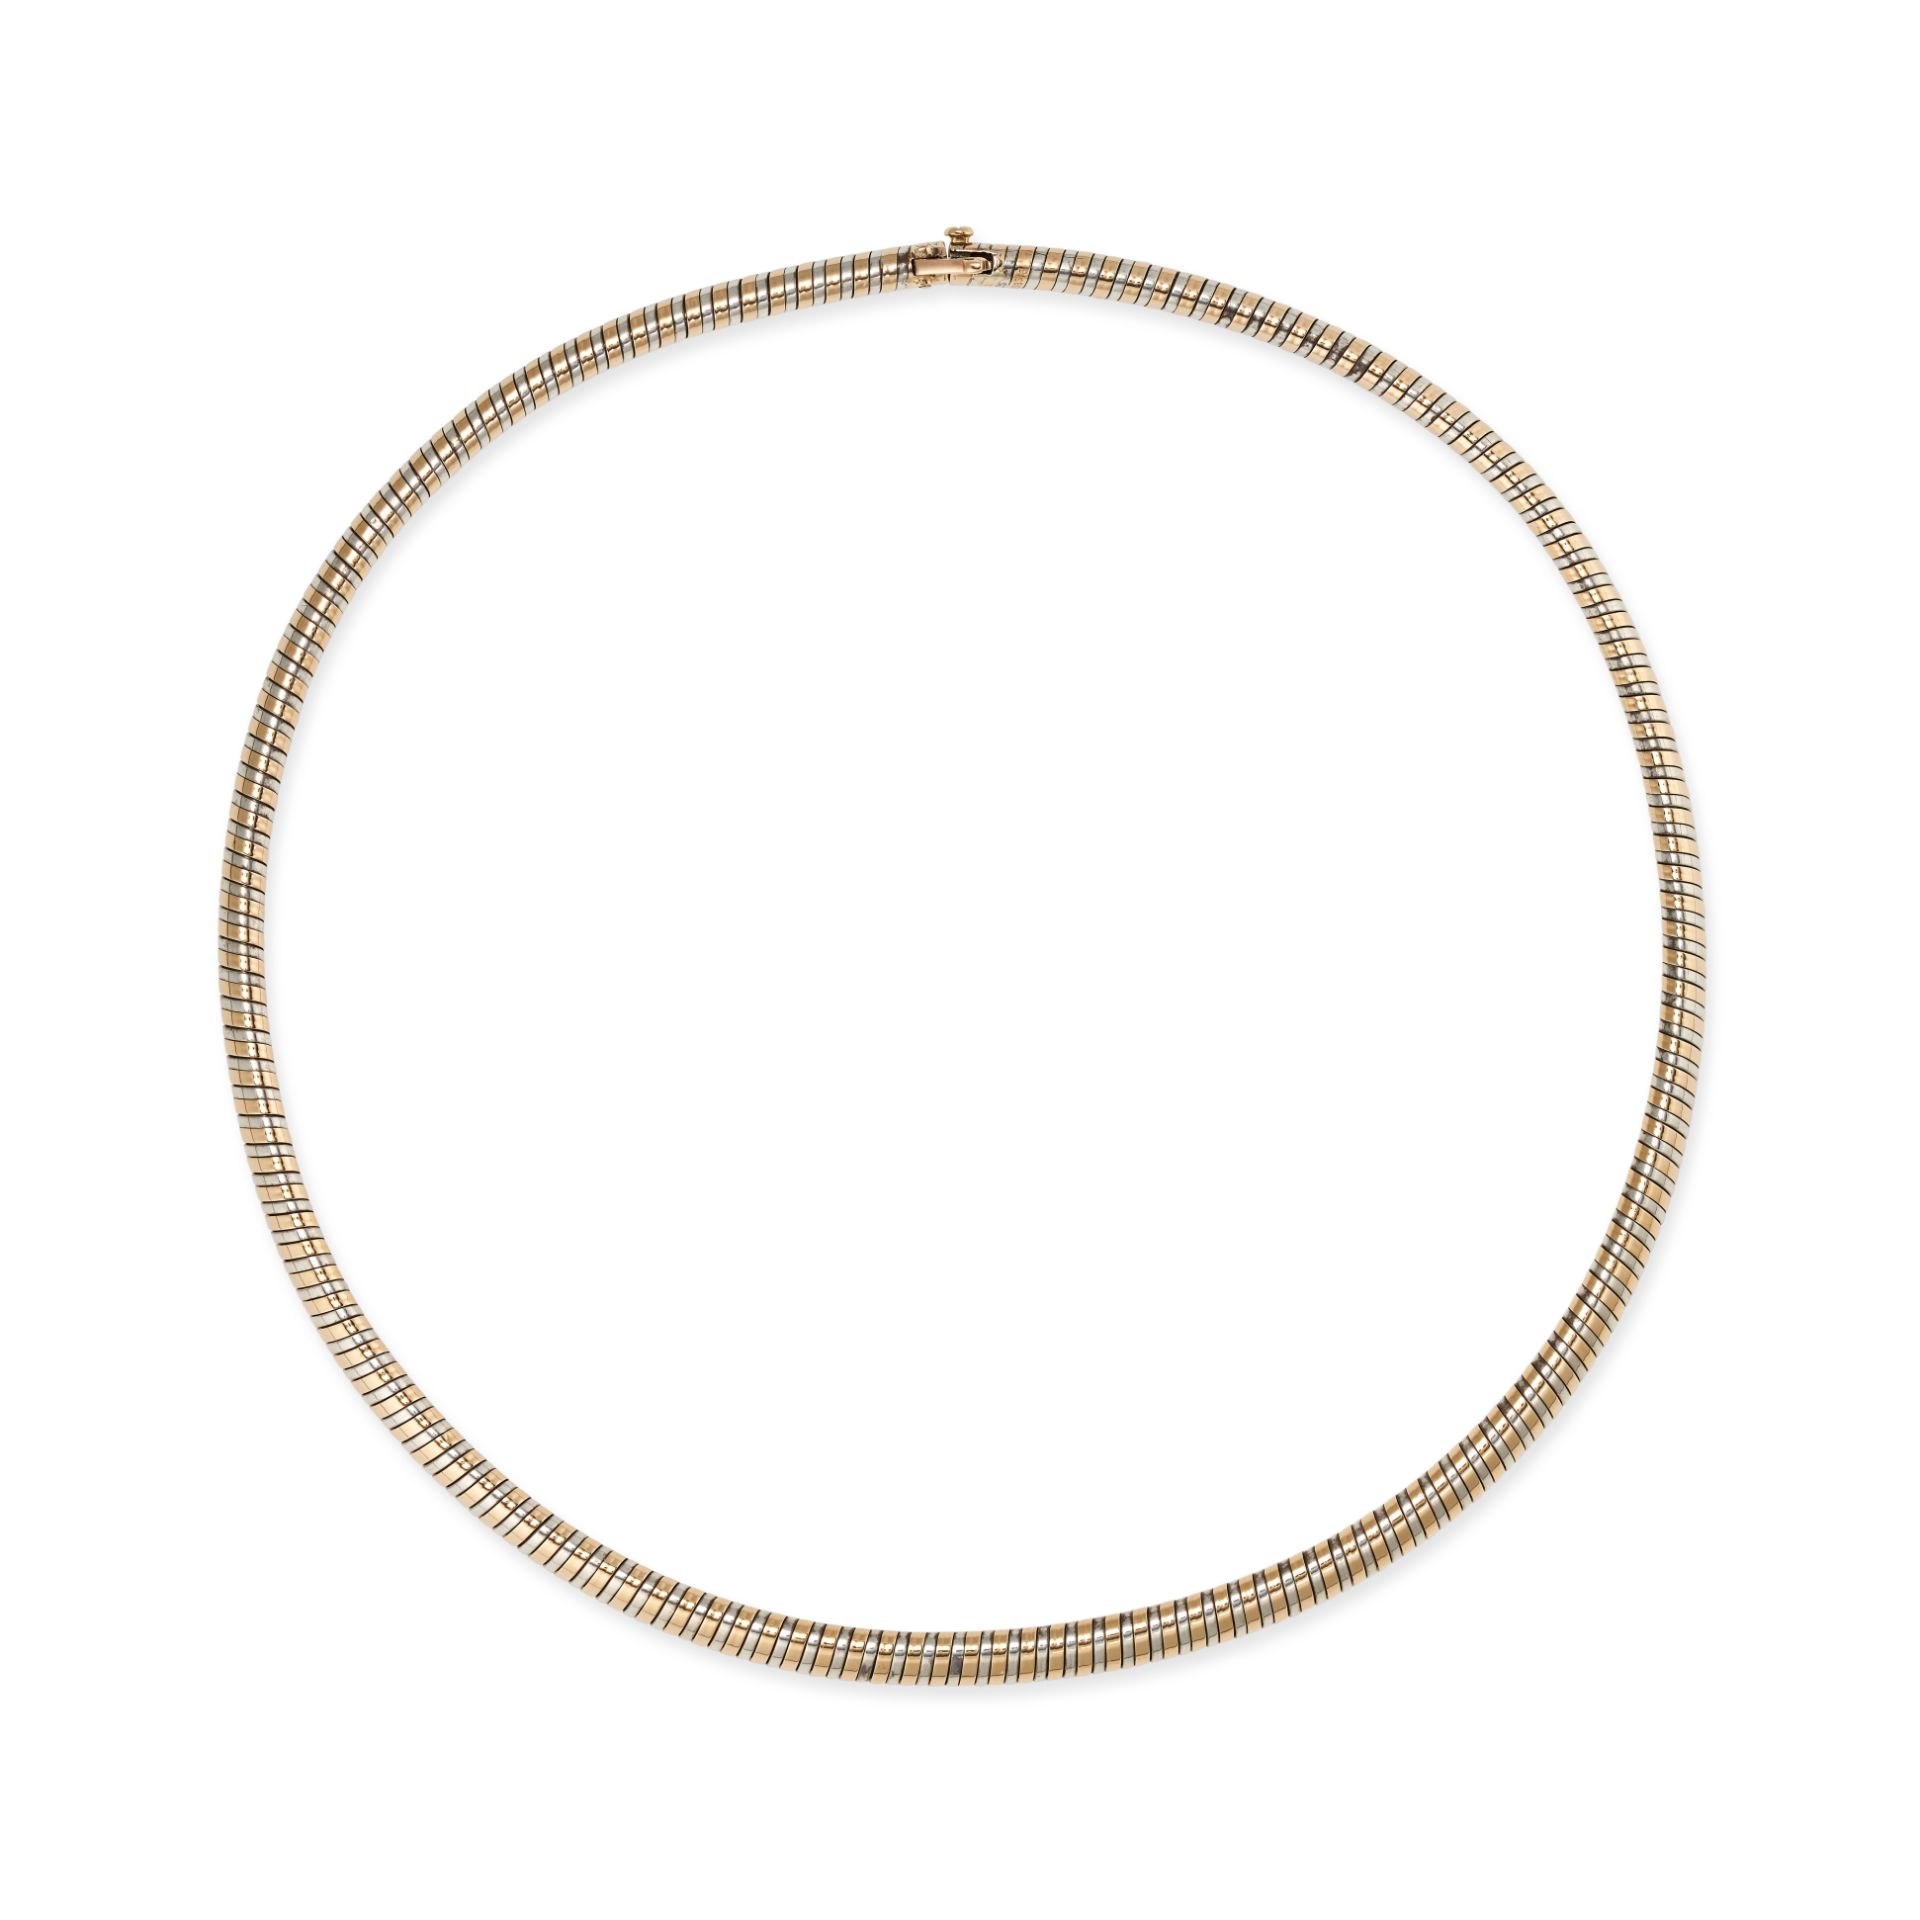 VAN CLEEF & ARPELS, A VINTAGE GAS PIPE COLLAR NECKLACE in 18ct yellow gold and silver, the gas pi...